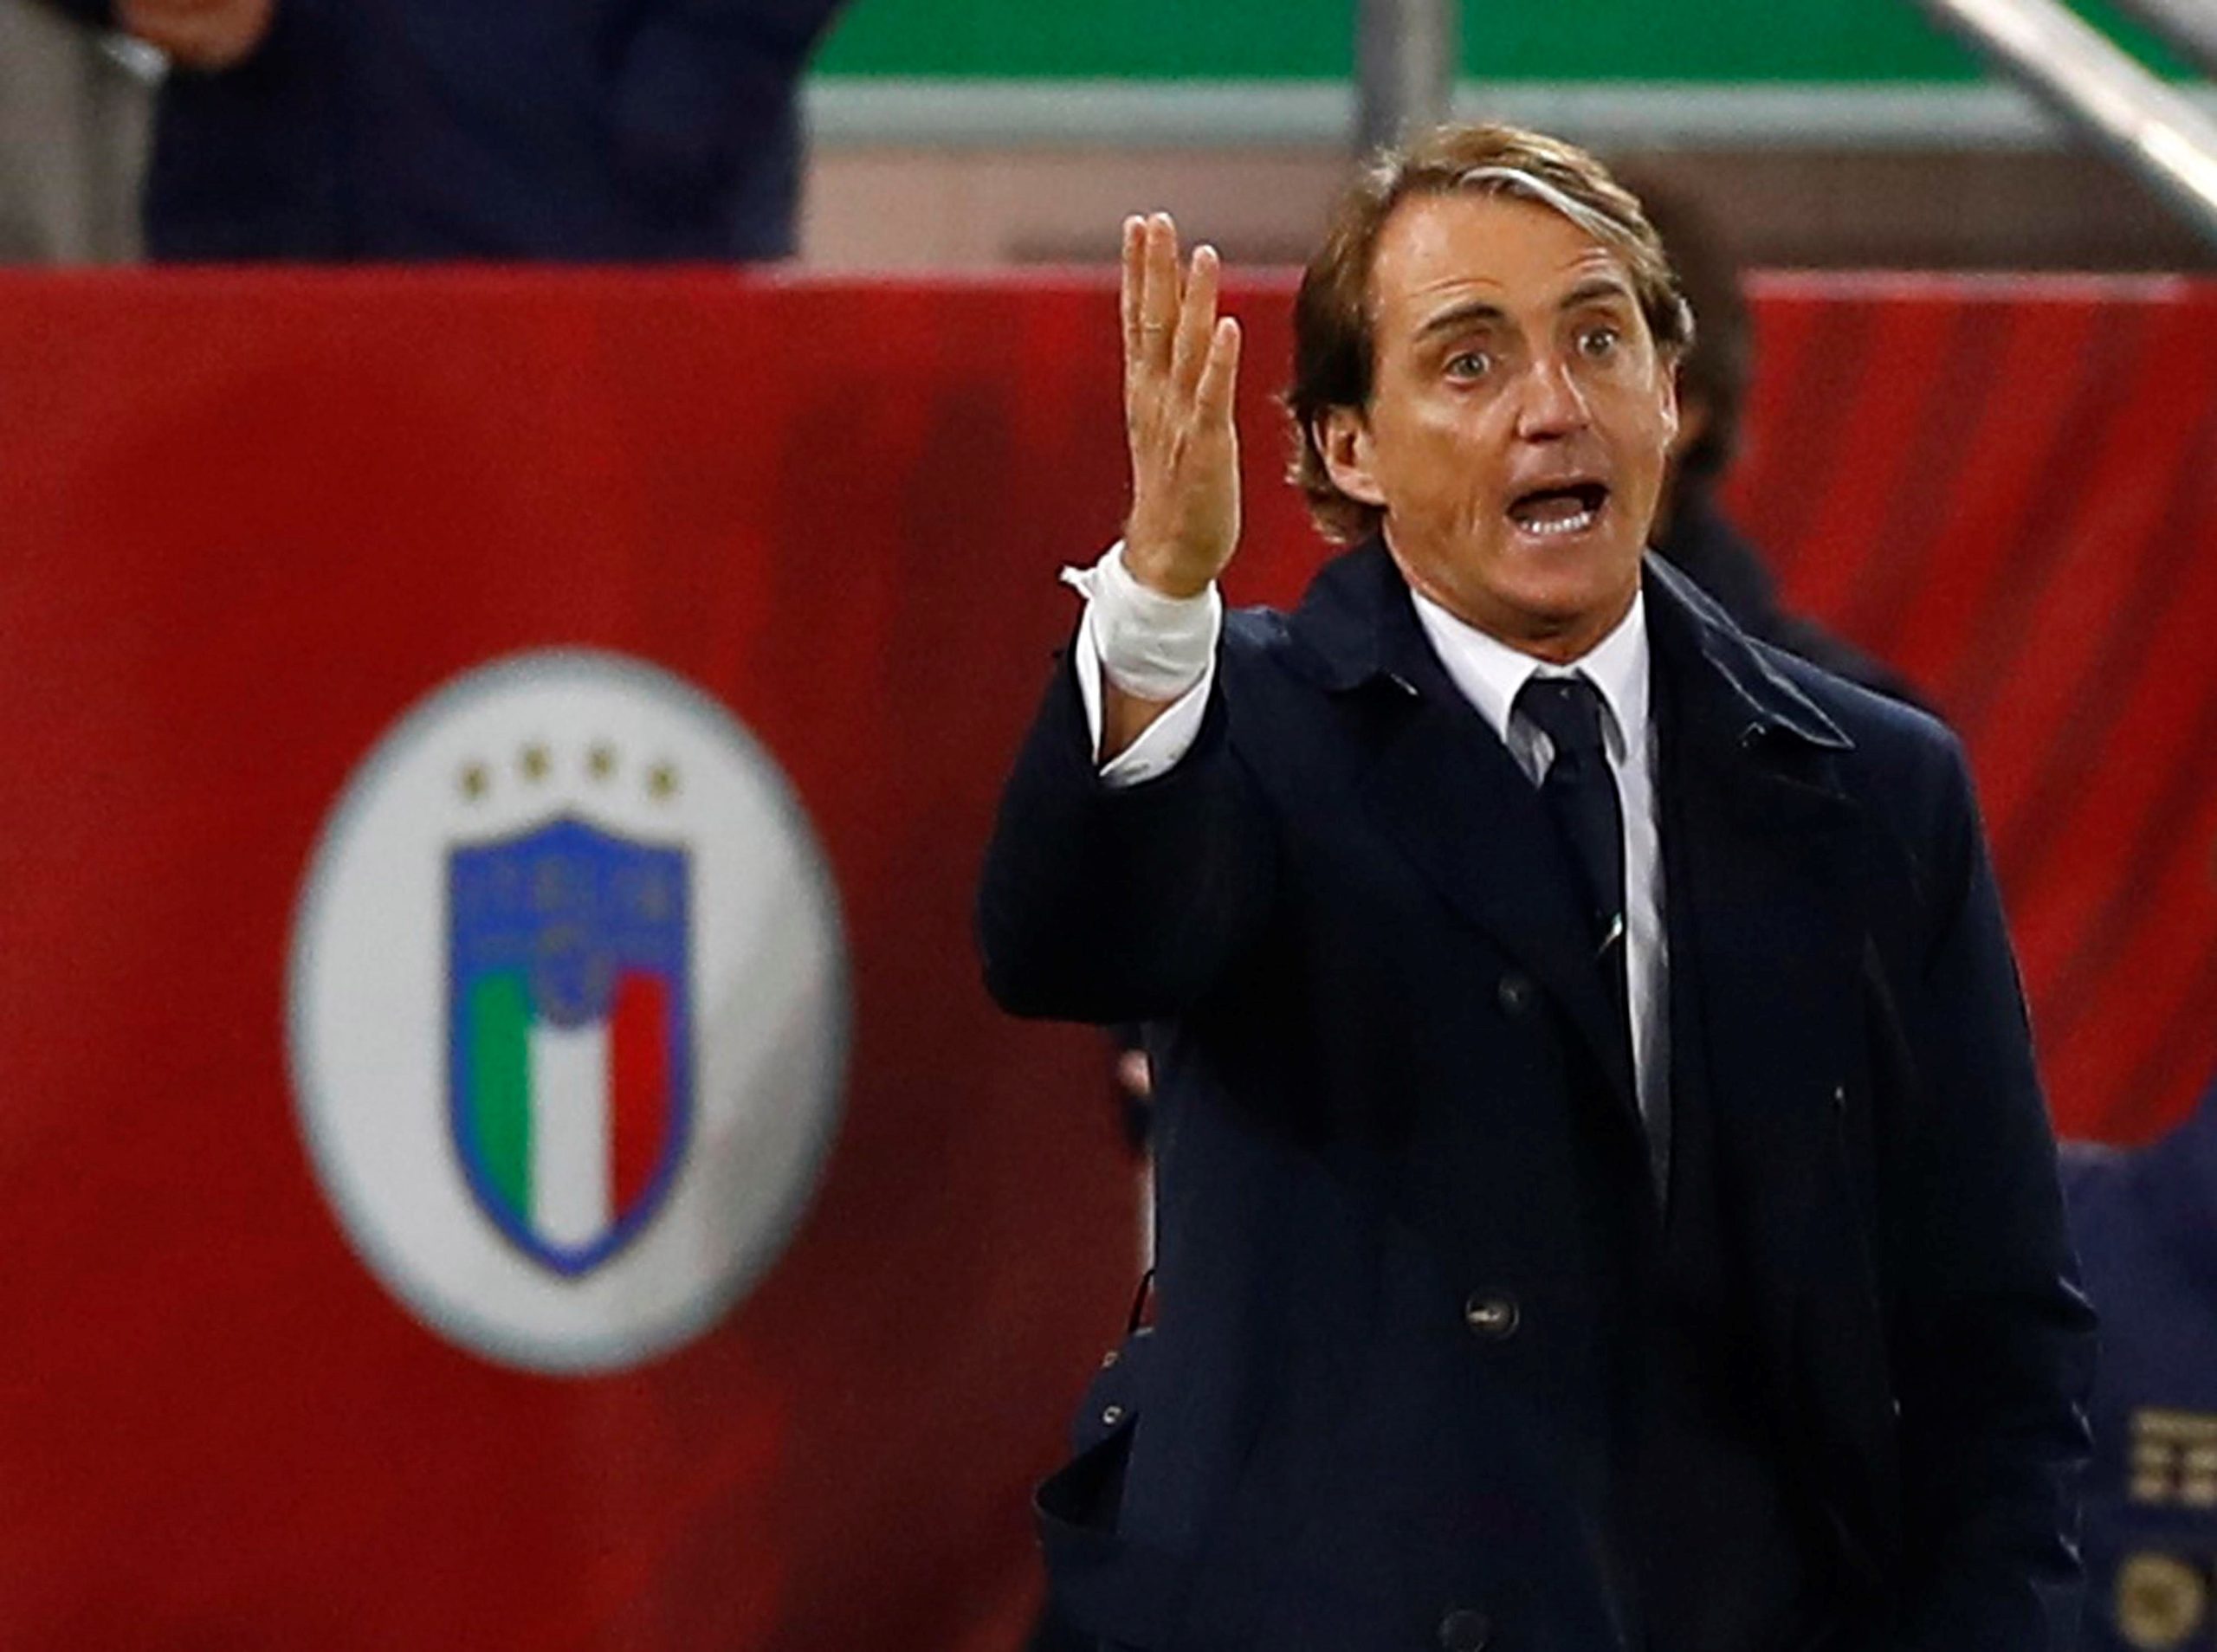 Soccer Football - World Cup - UEFA Qualifiers - Group C - Northern Ireland v Italy - Windsor Park, Belfast, Northern Ireland - November 15, 2021 Italy coach Roberto Mancini reacts Action Images via Reuters/Jason Cairnduff Photo: Jason Cairnduff/REUTERS